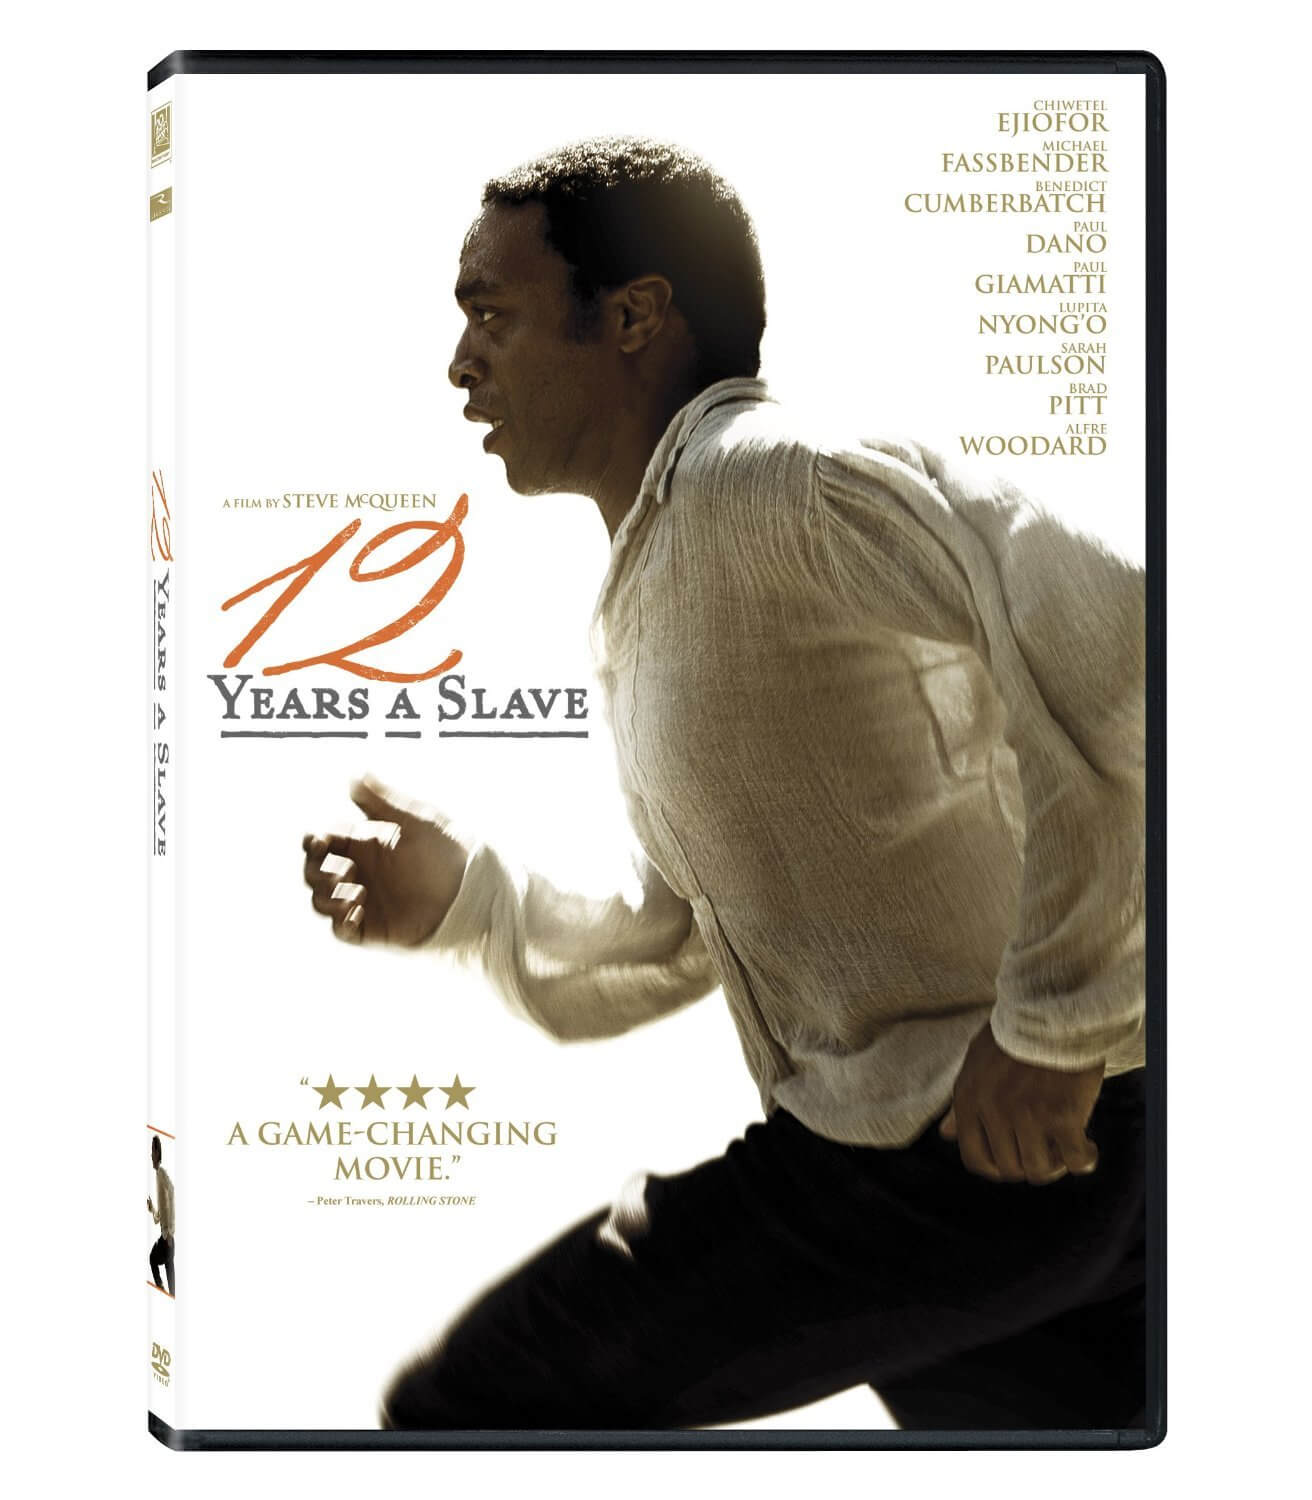 “12 Years a Slave” (2013)